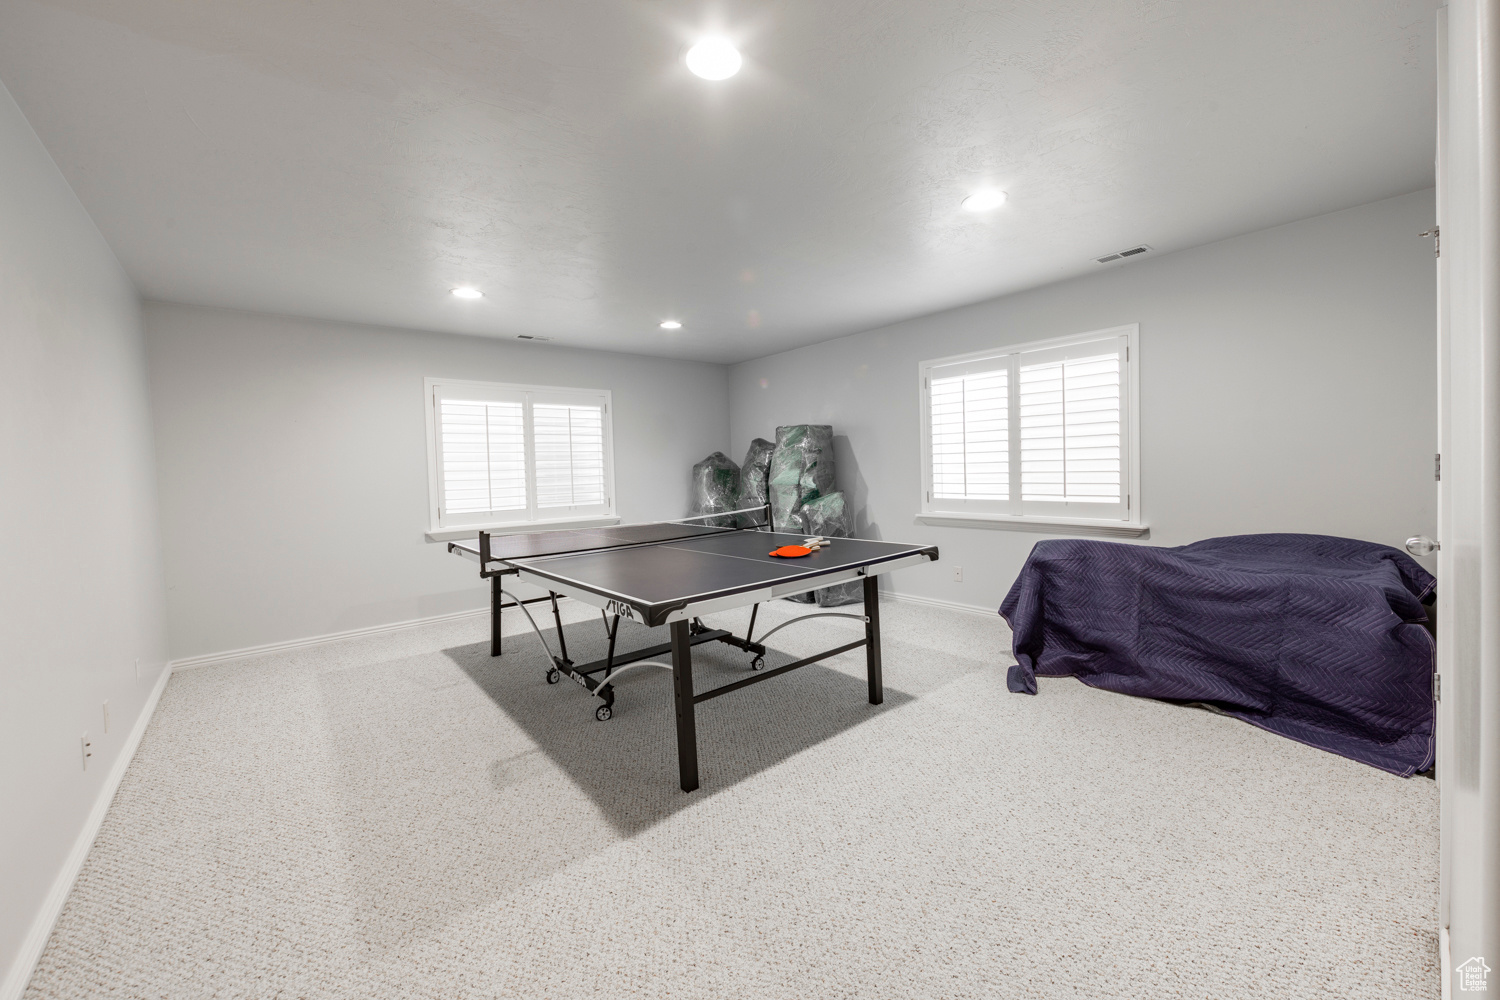 3rd large bedroom/ gameroom in basement featuring carpet floors and big windows letting in lots of light